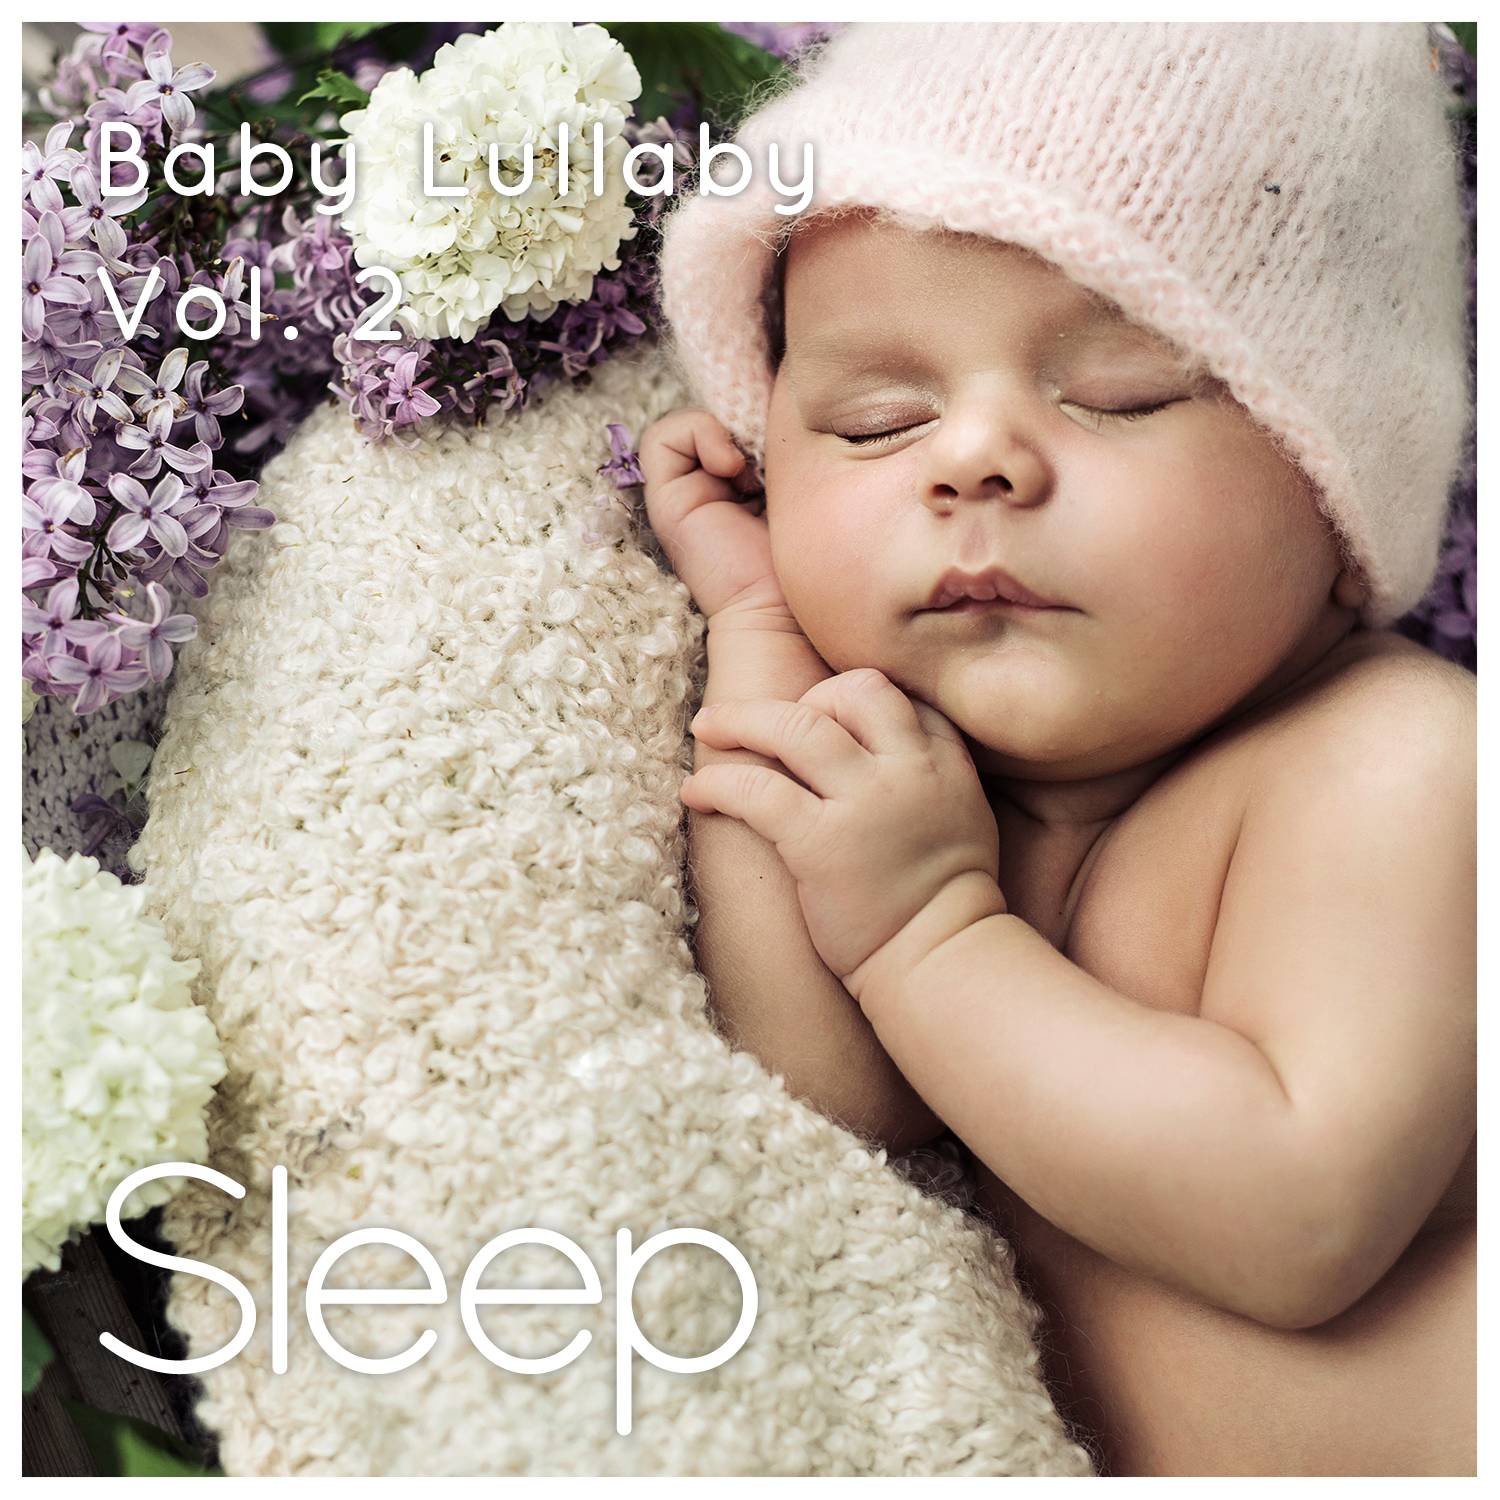 Baby Sleep Ambient Lullaby, Pt. 10